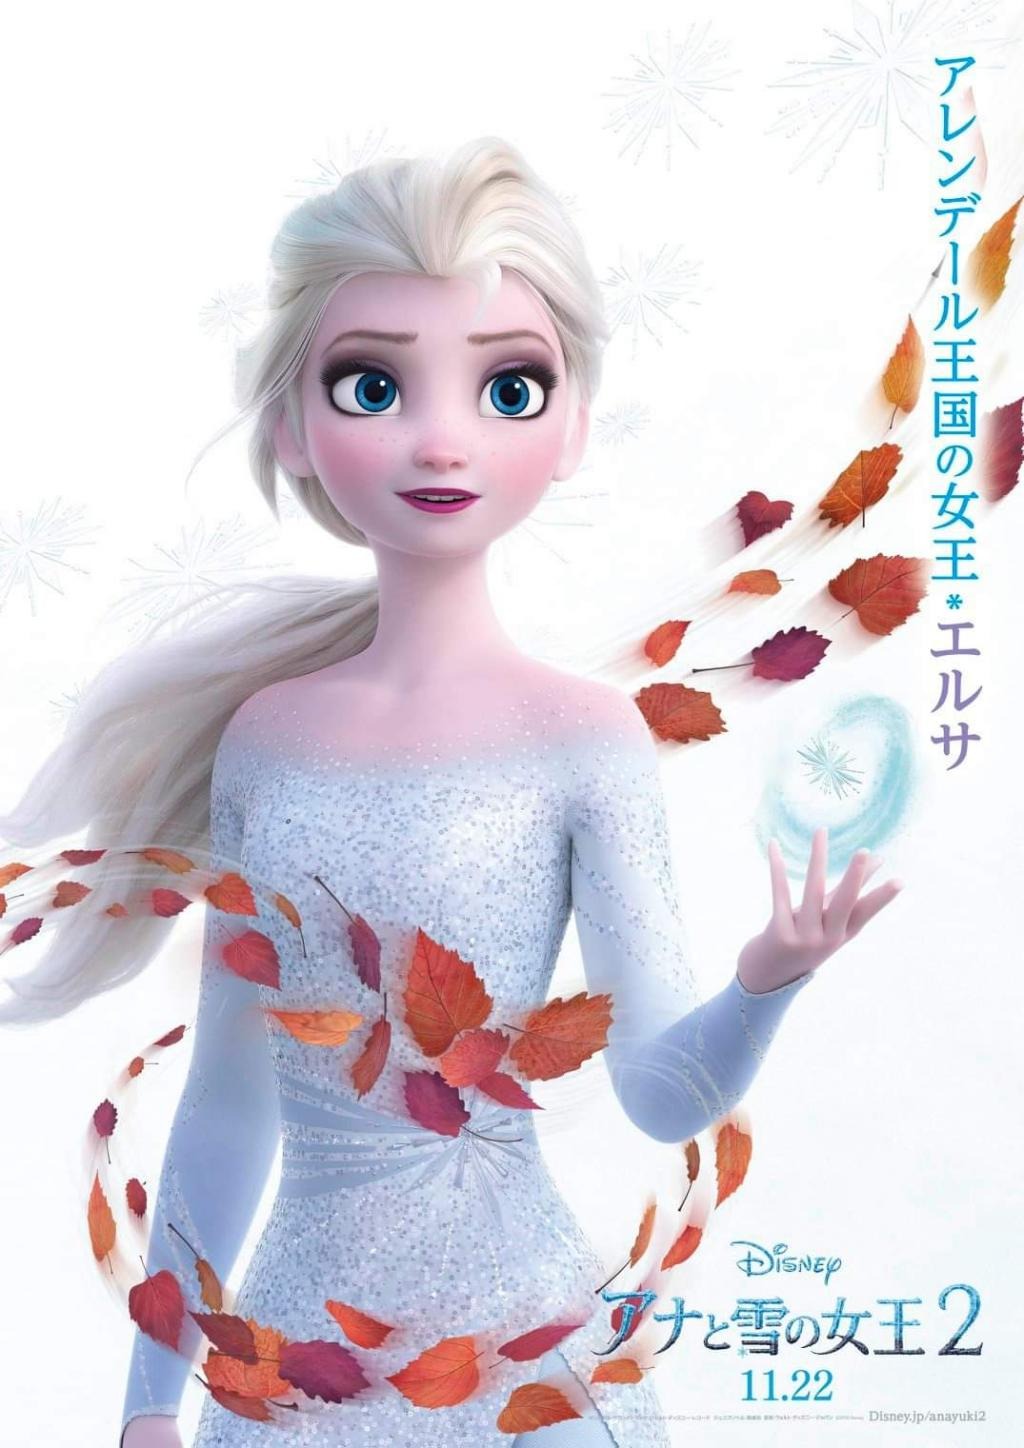 Extra Large Movie Poster Image for Frozen 2 (#10 of 31)